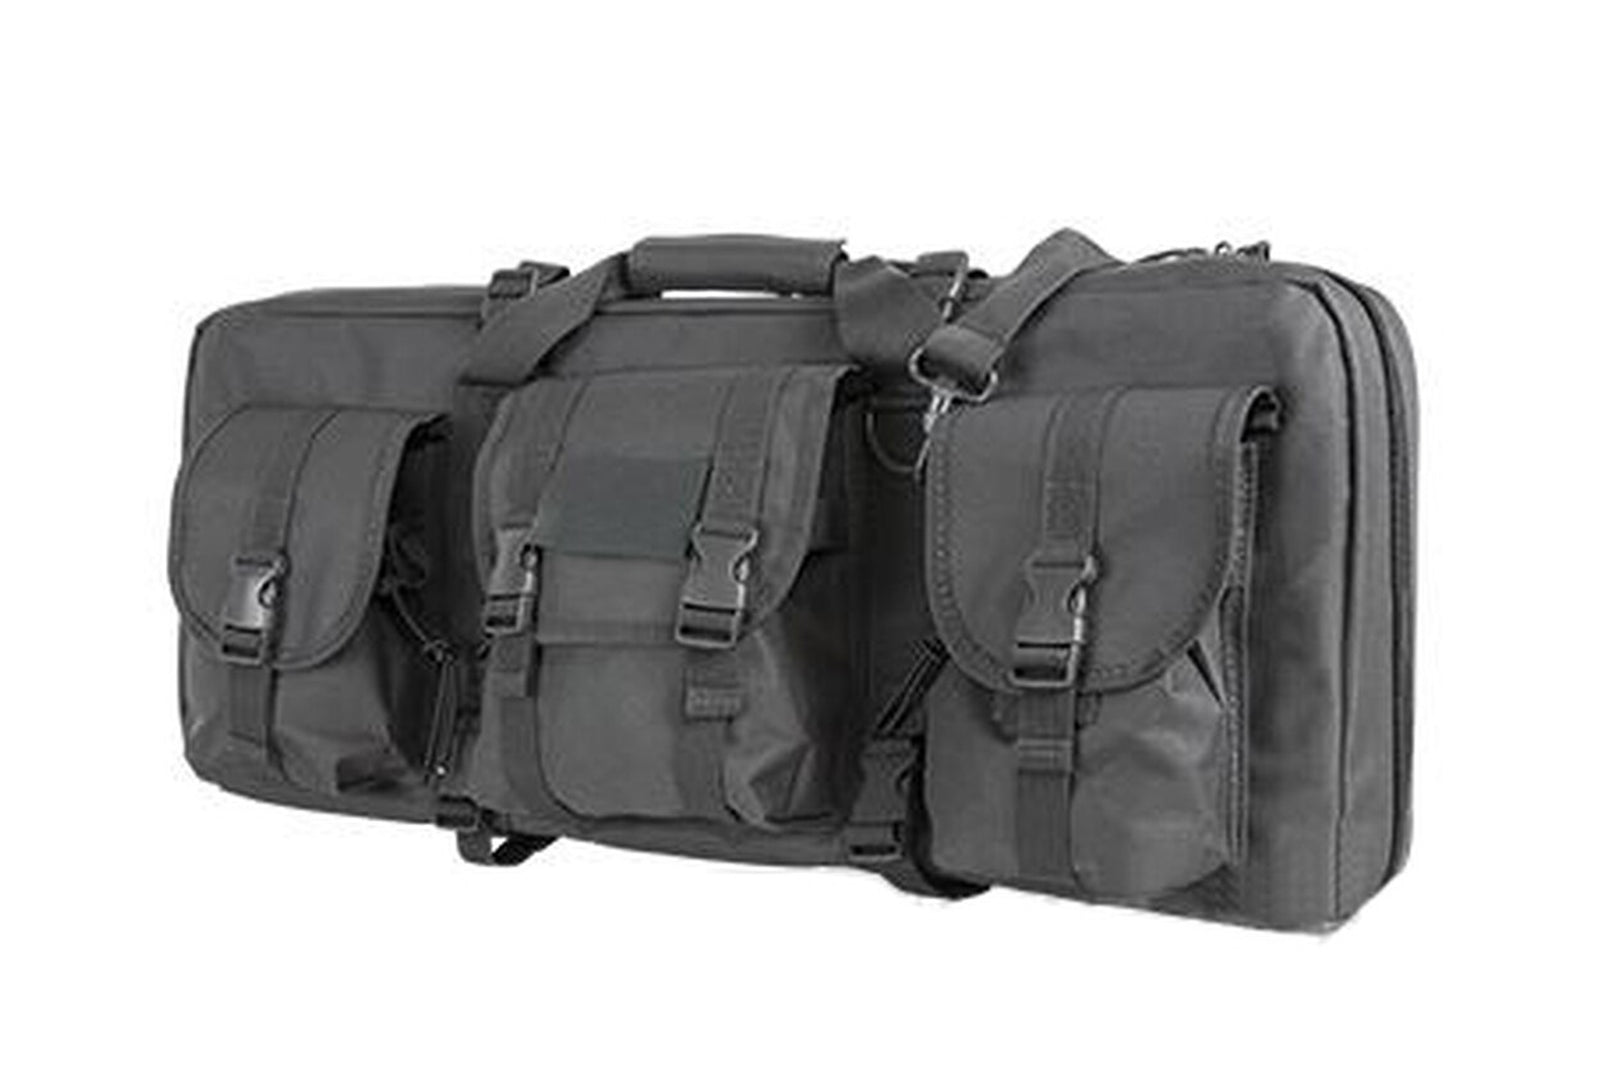 NcStar / VISM 28" Deluxe Dual Compartment Subgun / SBR Padded Carrying Bag (Color: Urban Gray)